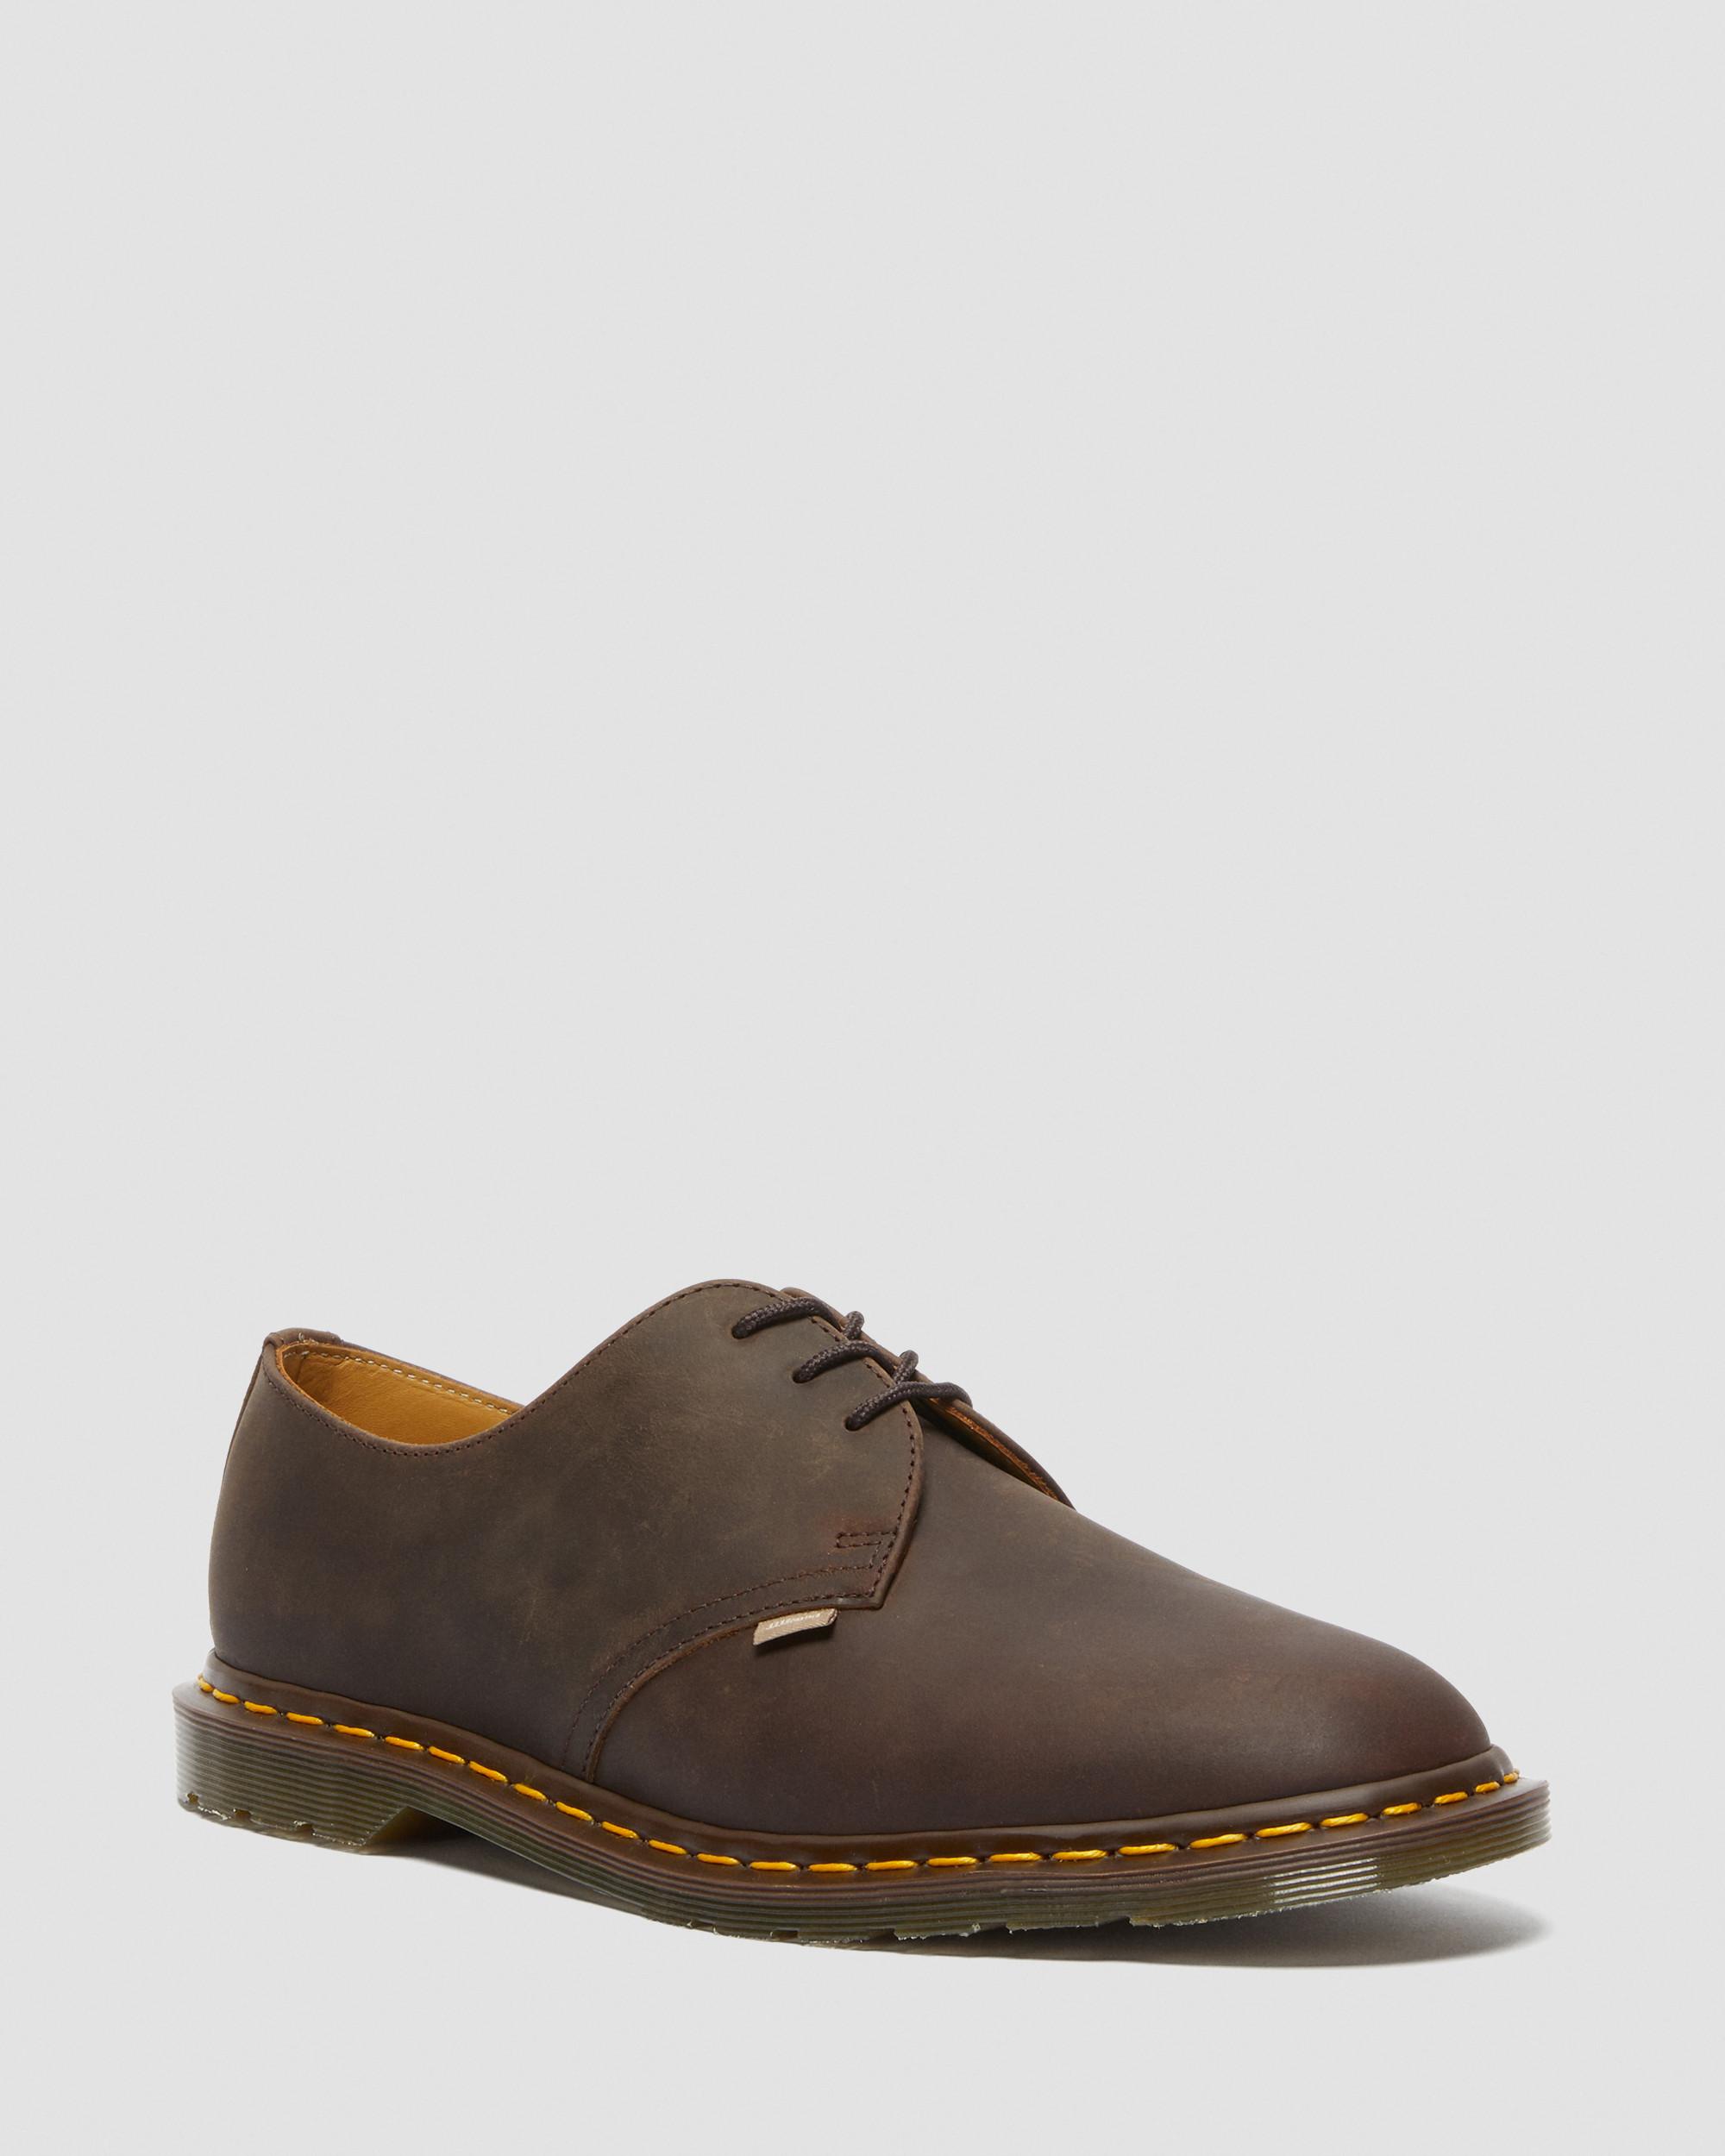 Archie II JJJJound Crazy Horse Leather Lace Up Shoes in Dark Brown | Dr.  Martens